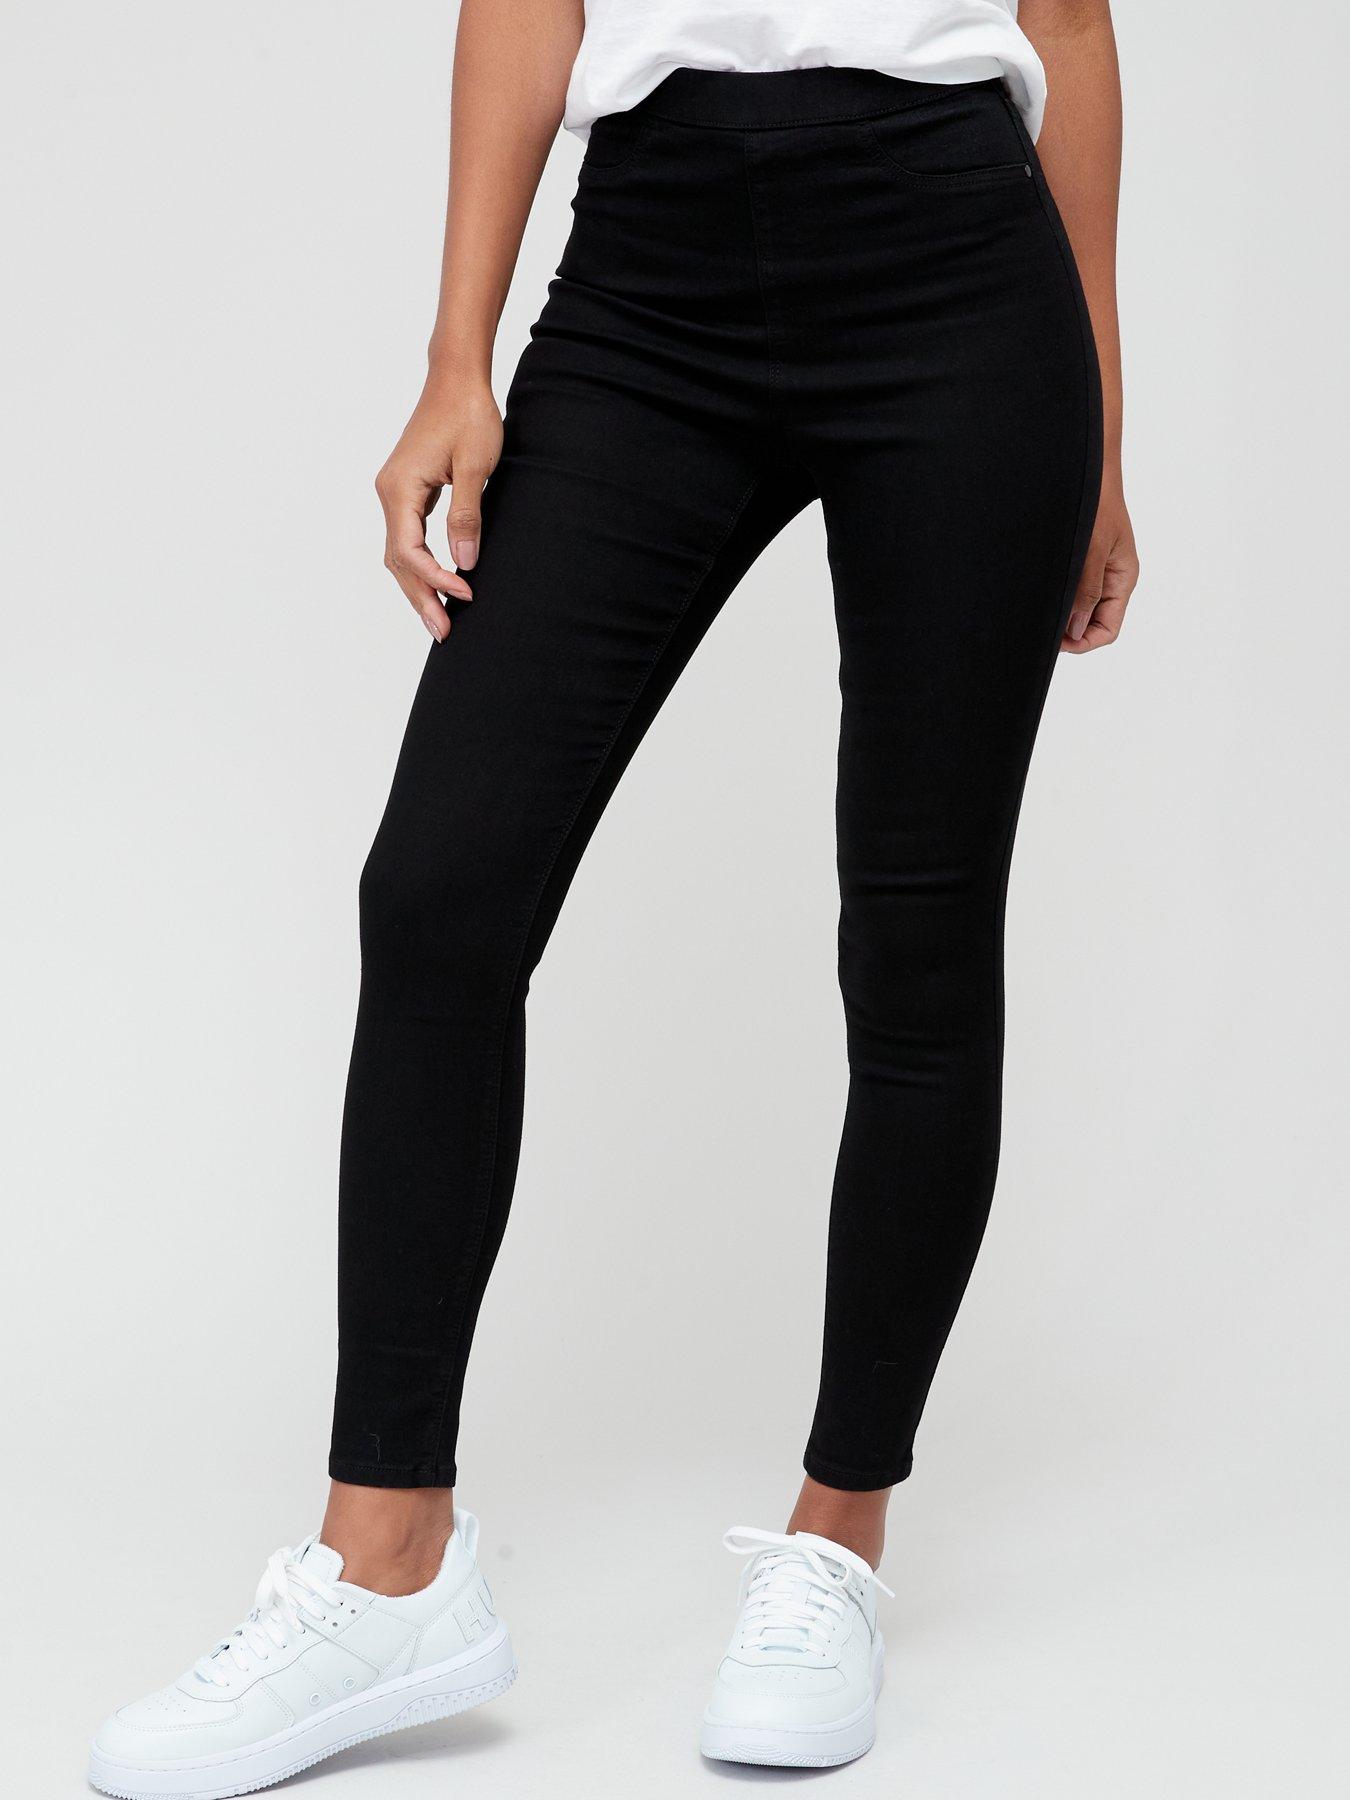 Women's High Waisted Pull-On Skinny Knit Denim Jeans Leggings Black S :  : Clothing, Shoes & Accessories